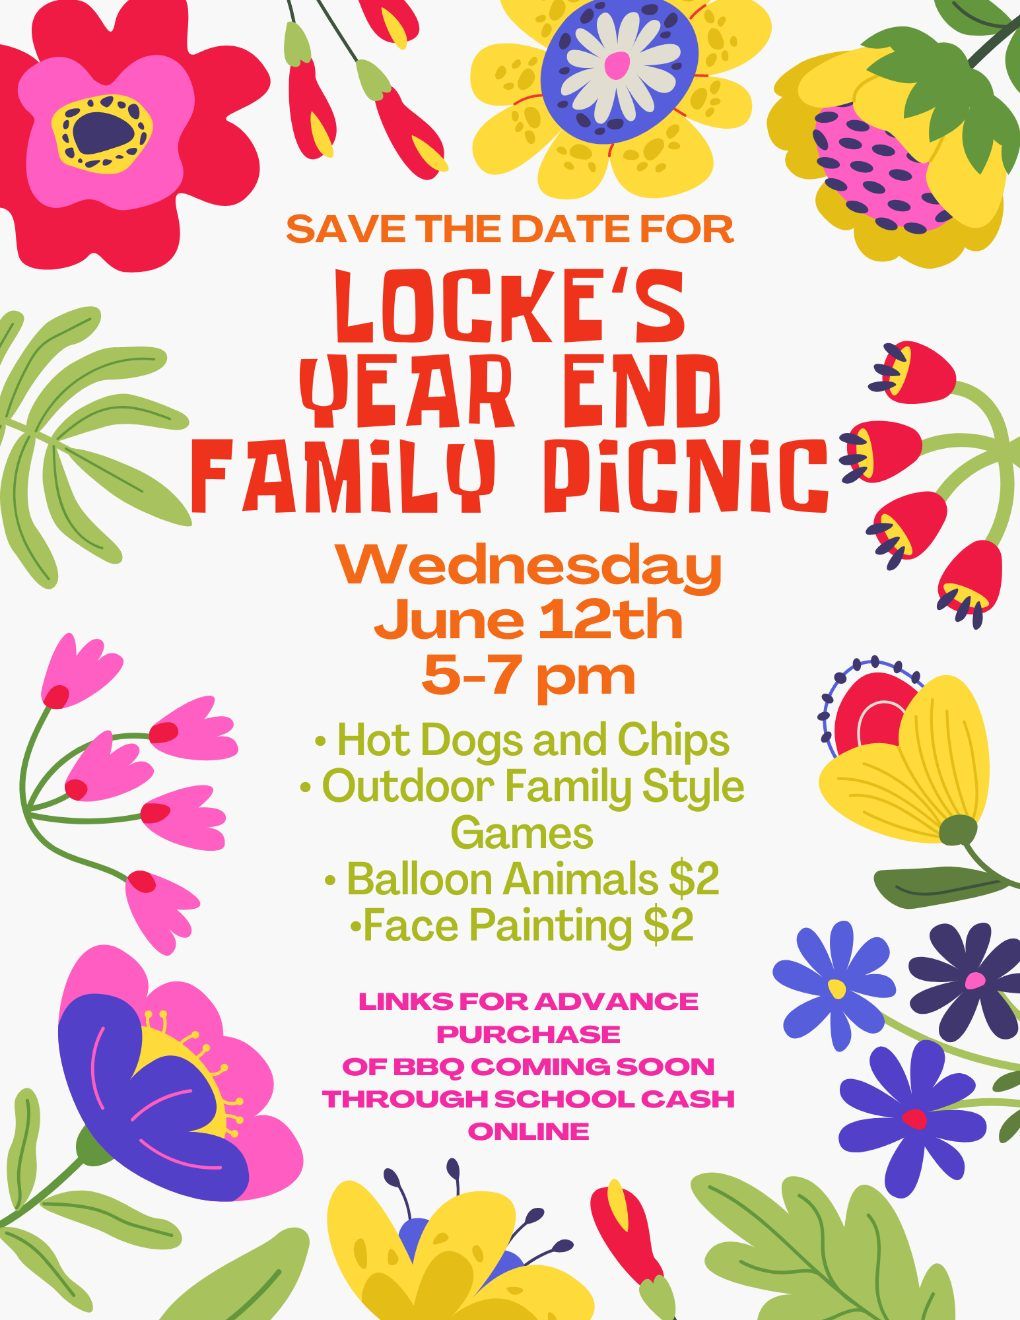 SAVE THE DATE - Locke's Year End Family Picnic